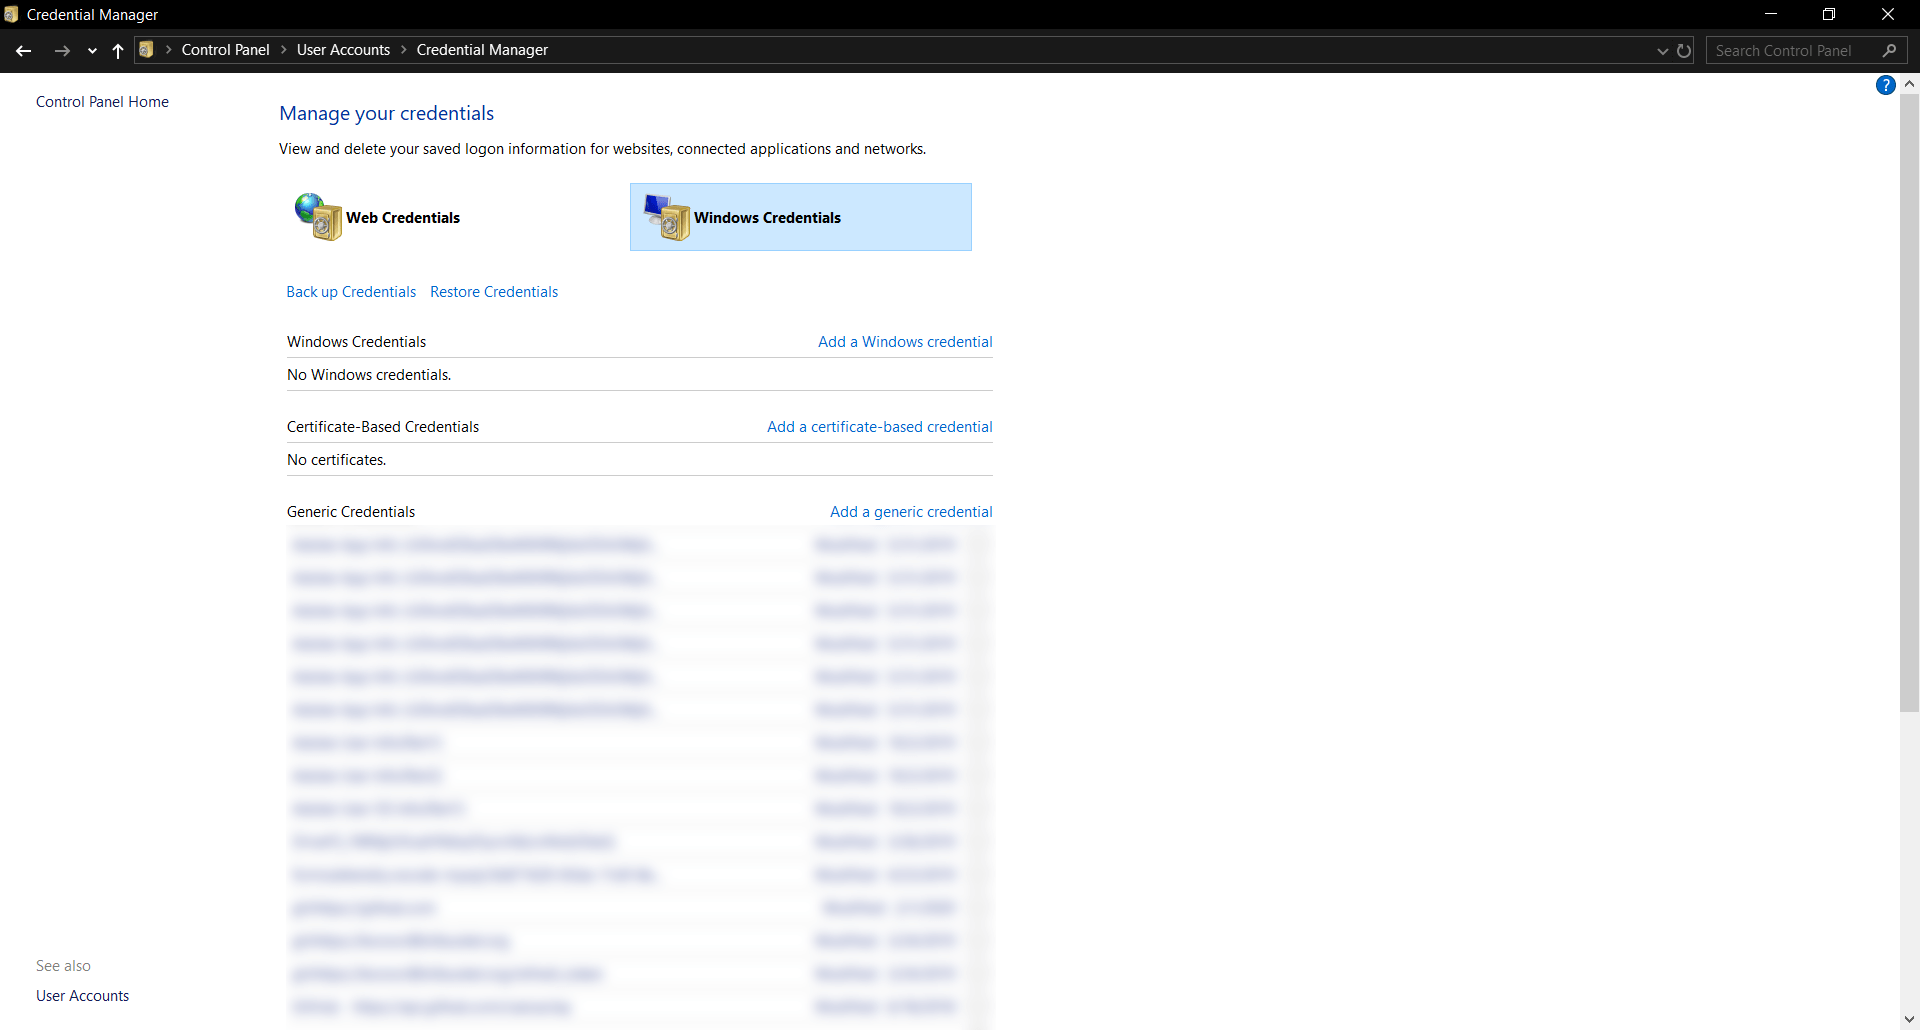 microsoft outlook keeps asking for password